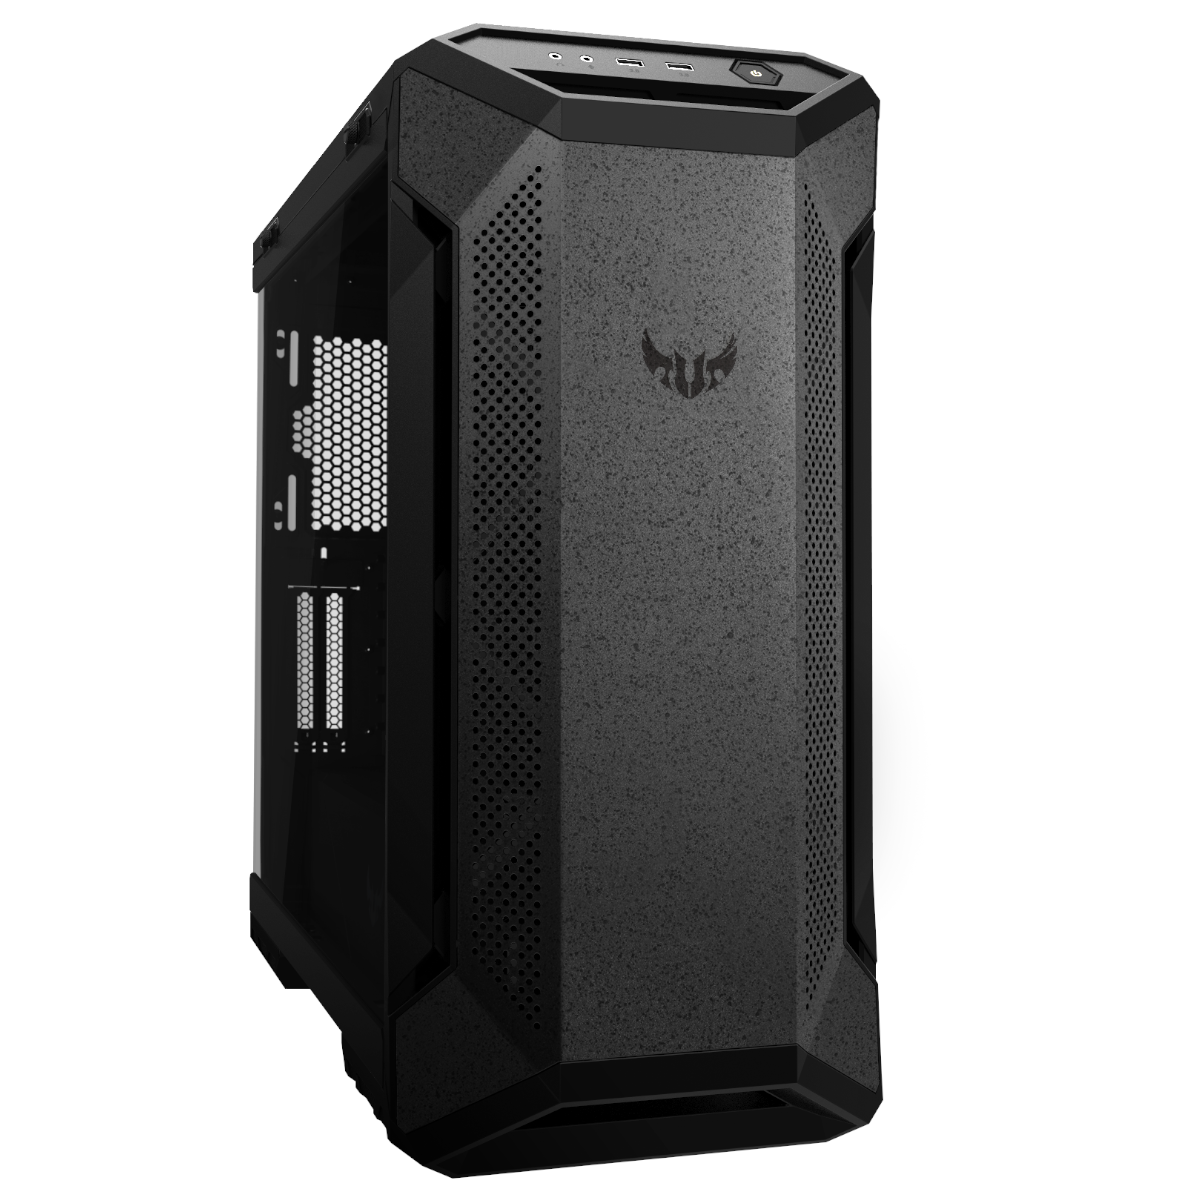 Asus - ASUS TUF Gaming GT501VC Midi-Tower Case - Black Tempered Glass